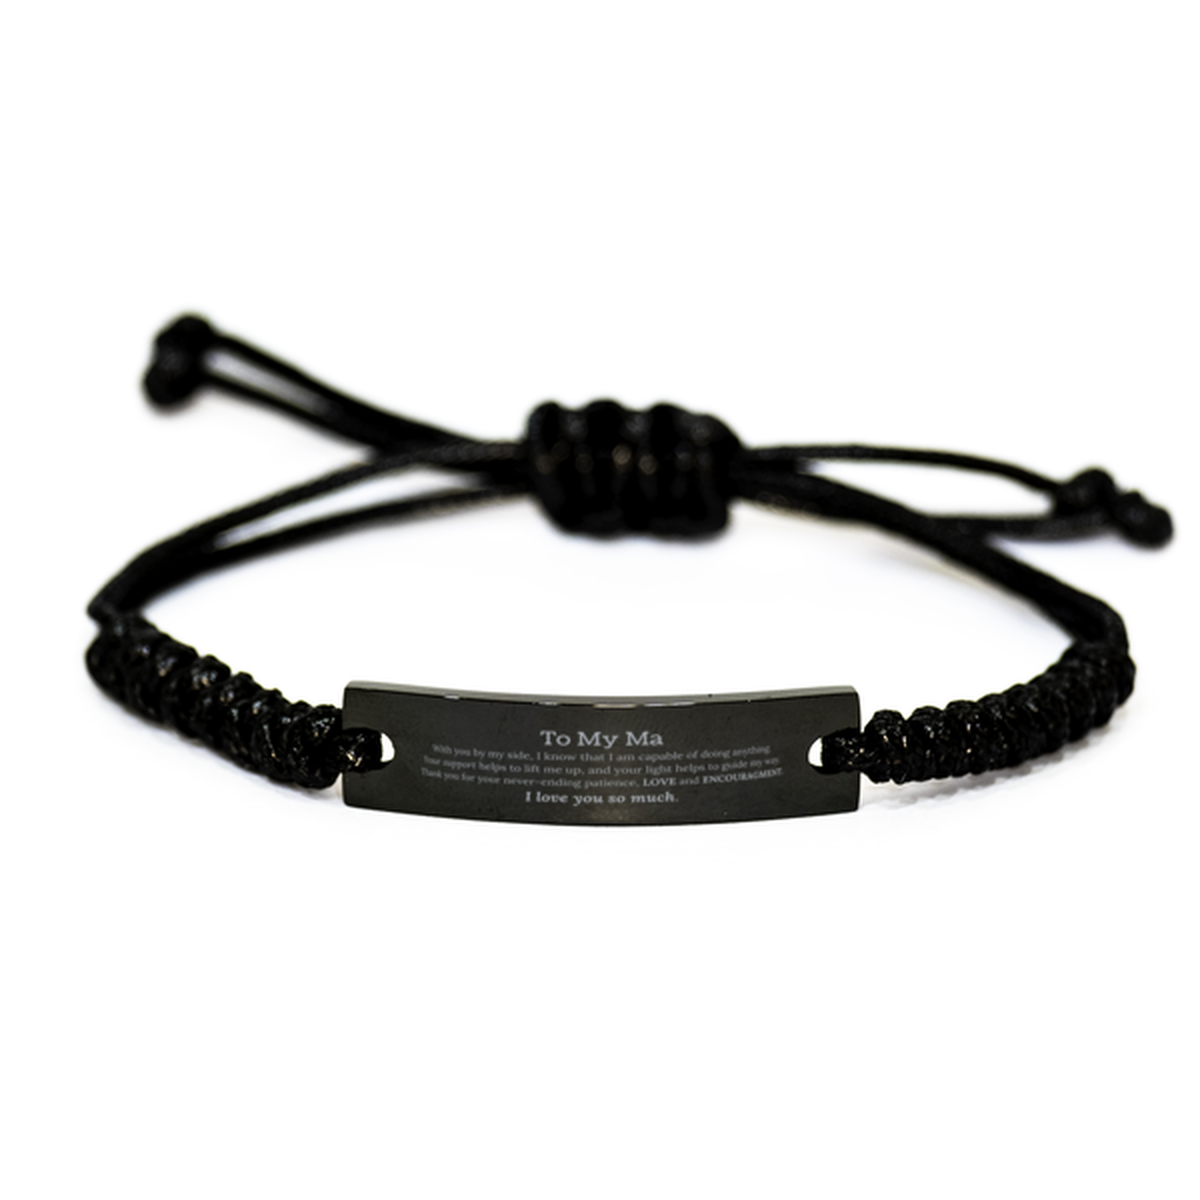 Appreciation Ma Black Rope Bracelet Gifts, To My Ma Birthday Christmas Wedding Keepsake Gifts for Ma With you by my side, I know that I am capable of doing anything. I love you so much